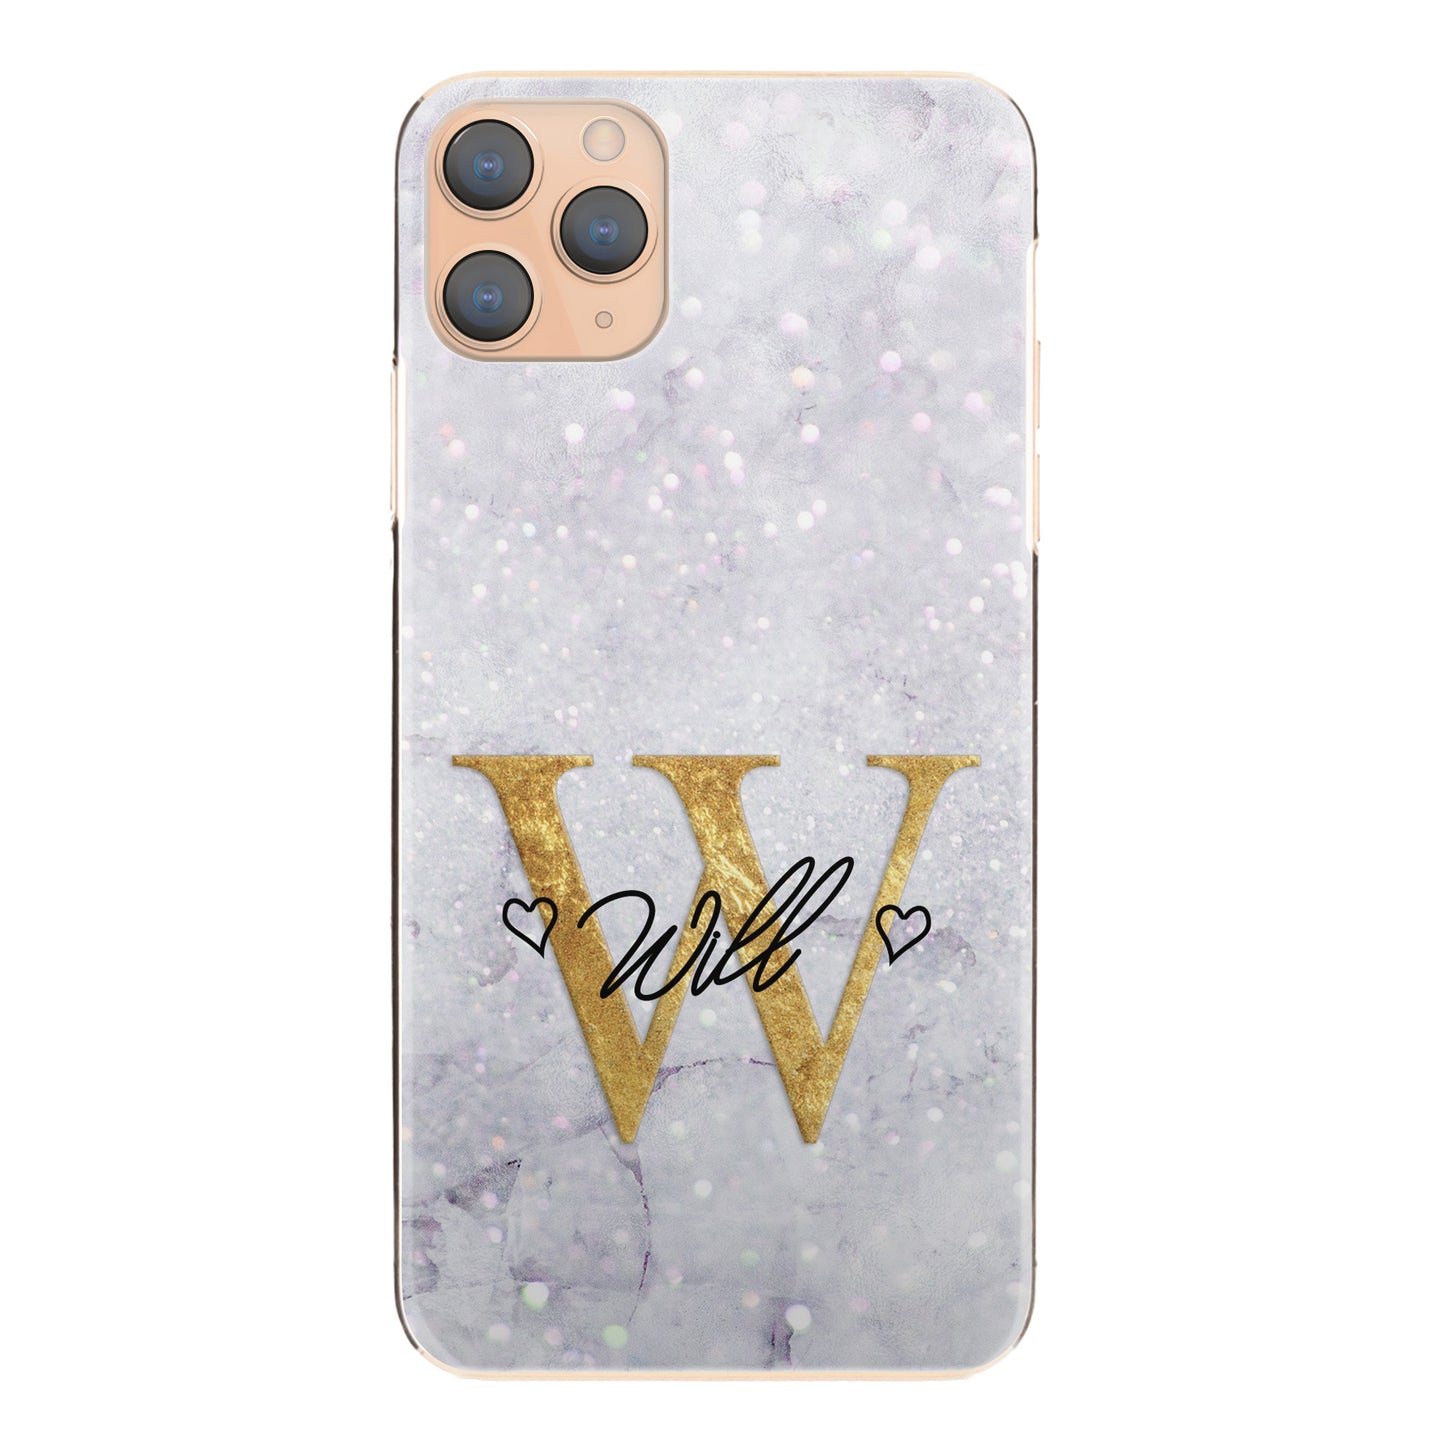 Personalised Oppo Phone Hard Case with Gold Initial and Heart Accented Text on Crystal Marble